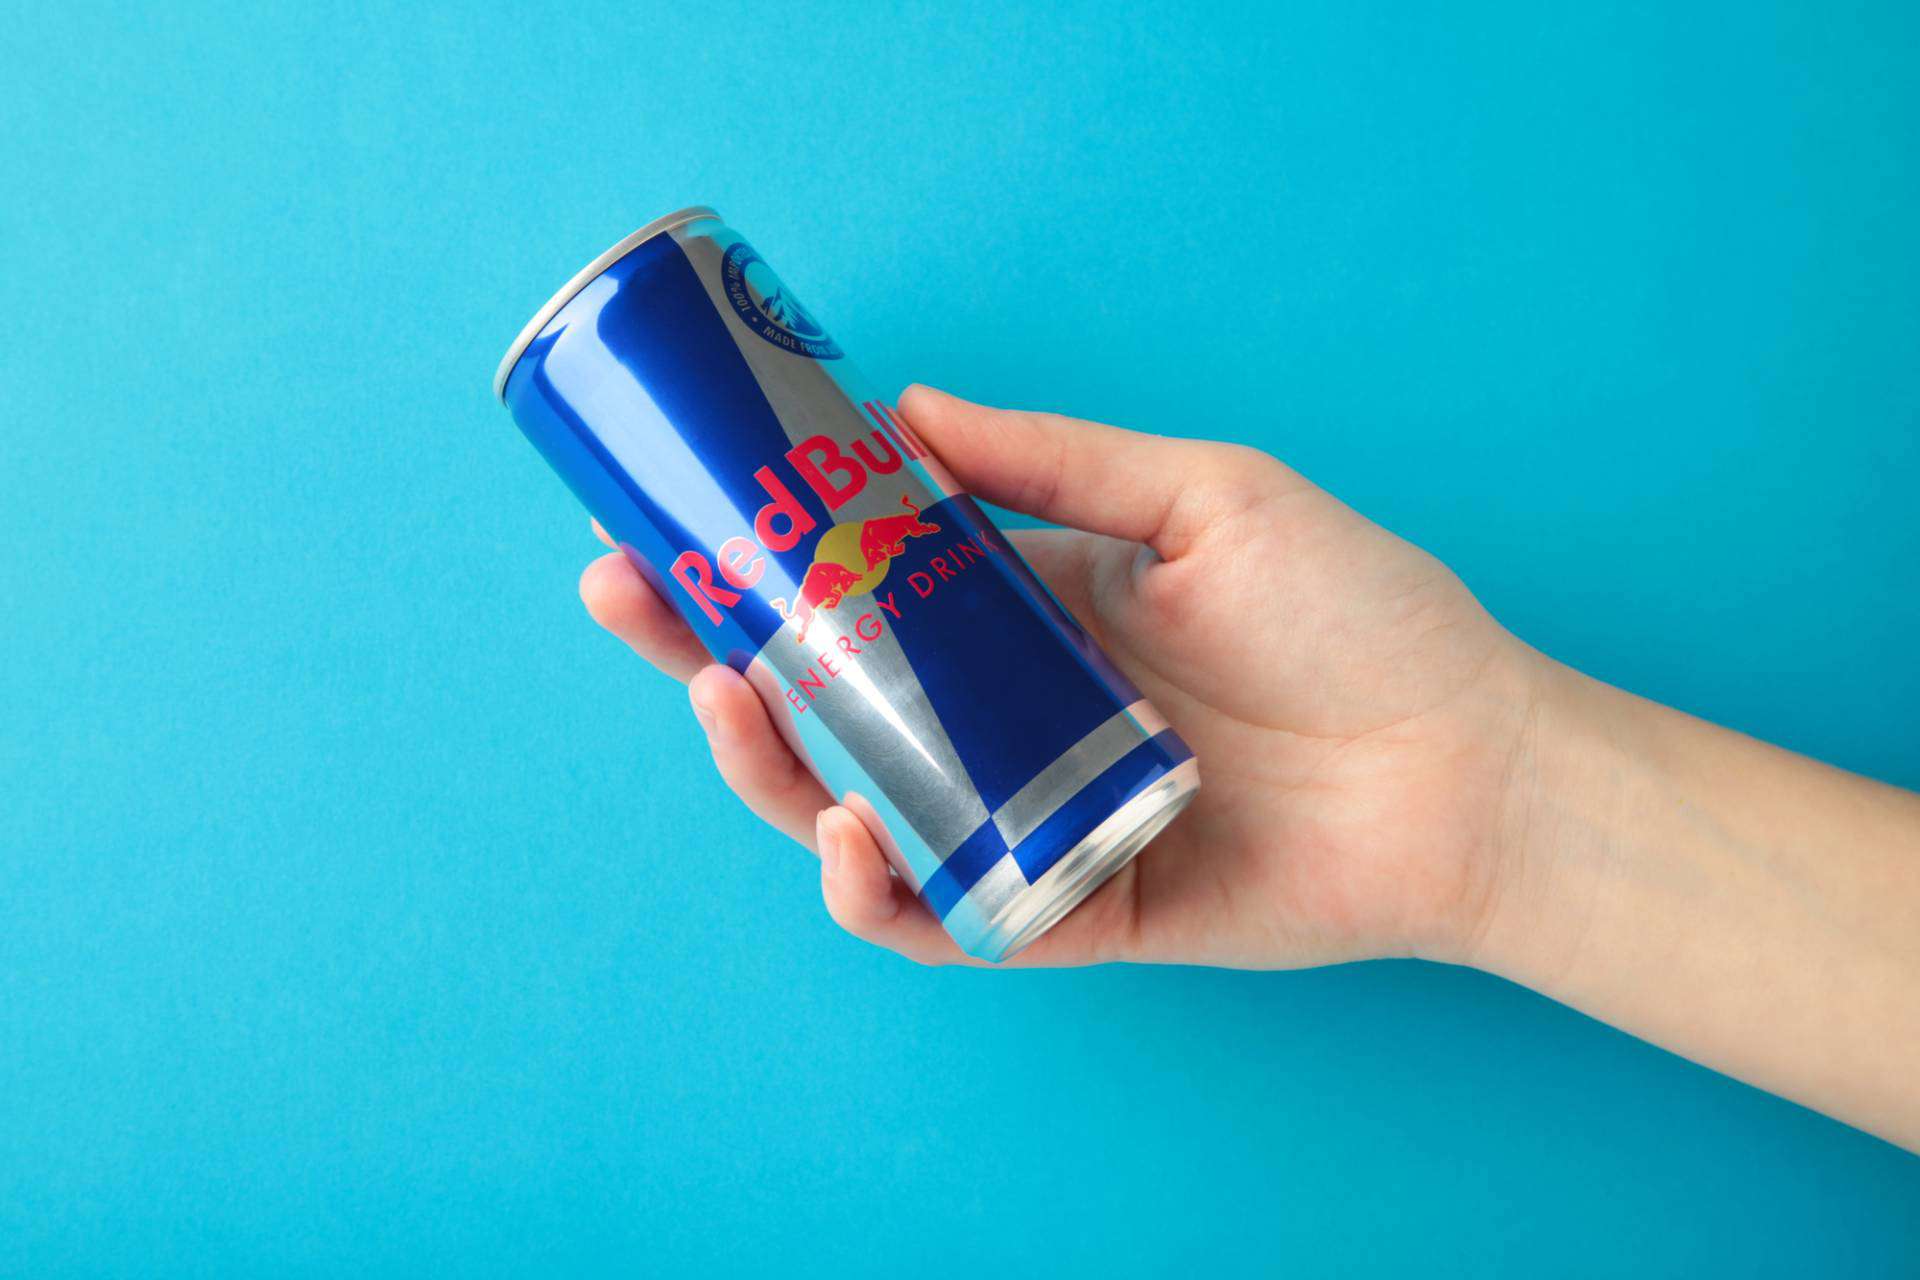 Hand holding a can of Red Bull energy drink